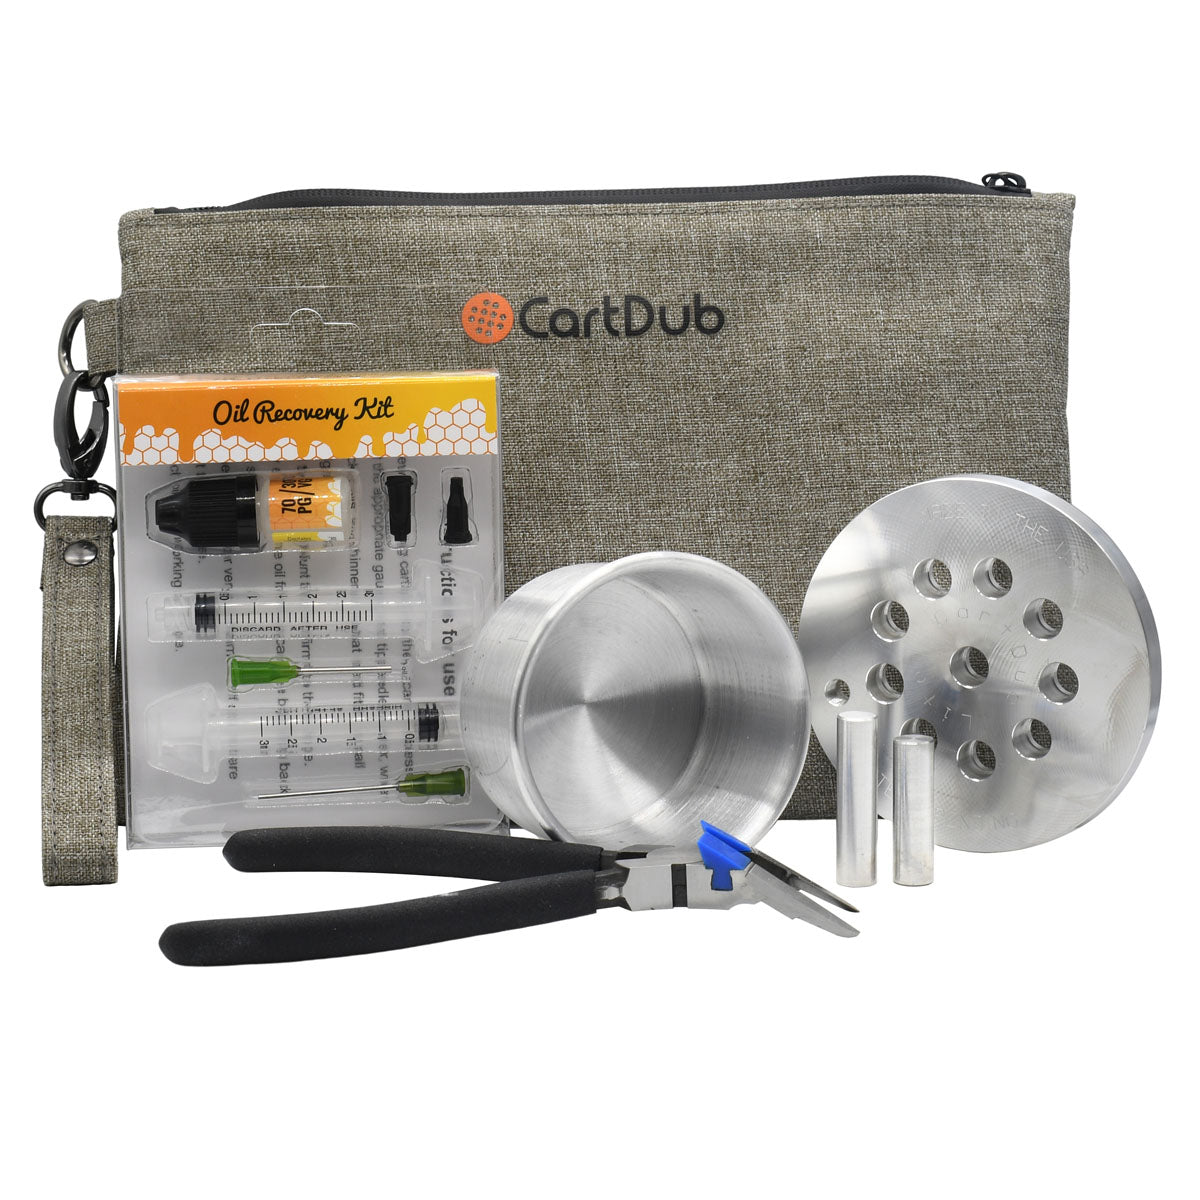 CartDub PLUS Complete Kit to open and remove oil from carts